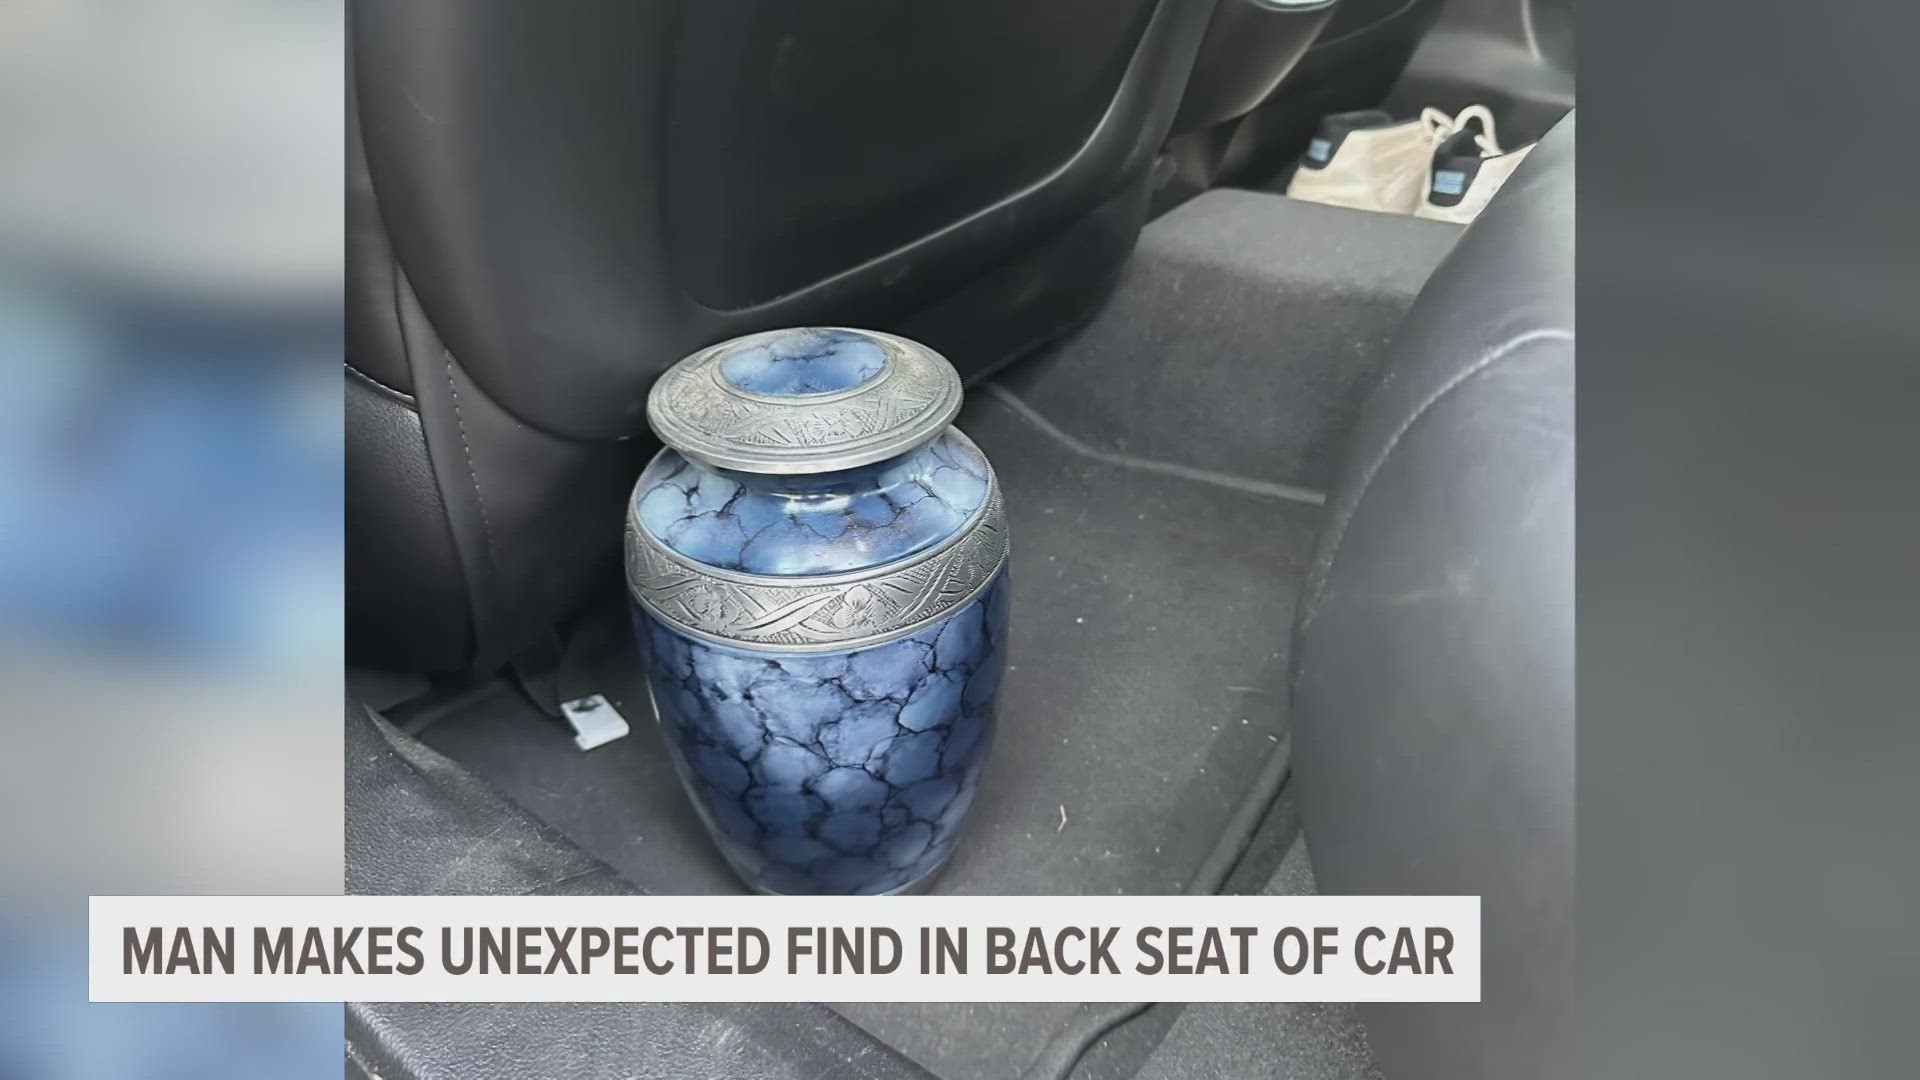 A Kalamazoo man made an unusual discovery in the back of his car this week.